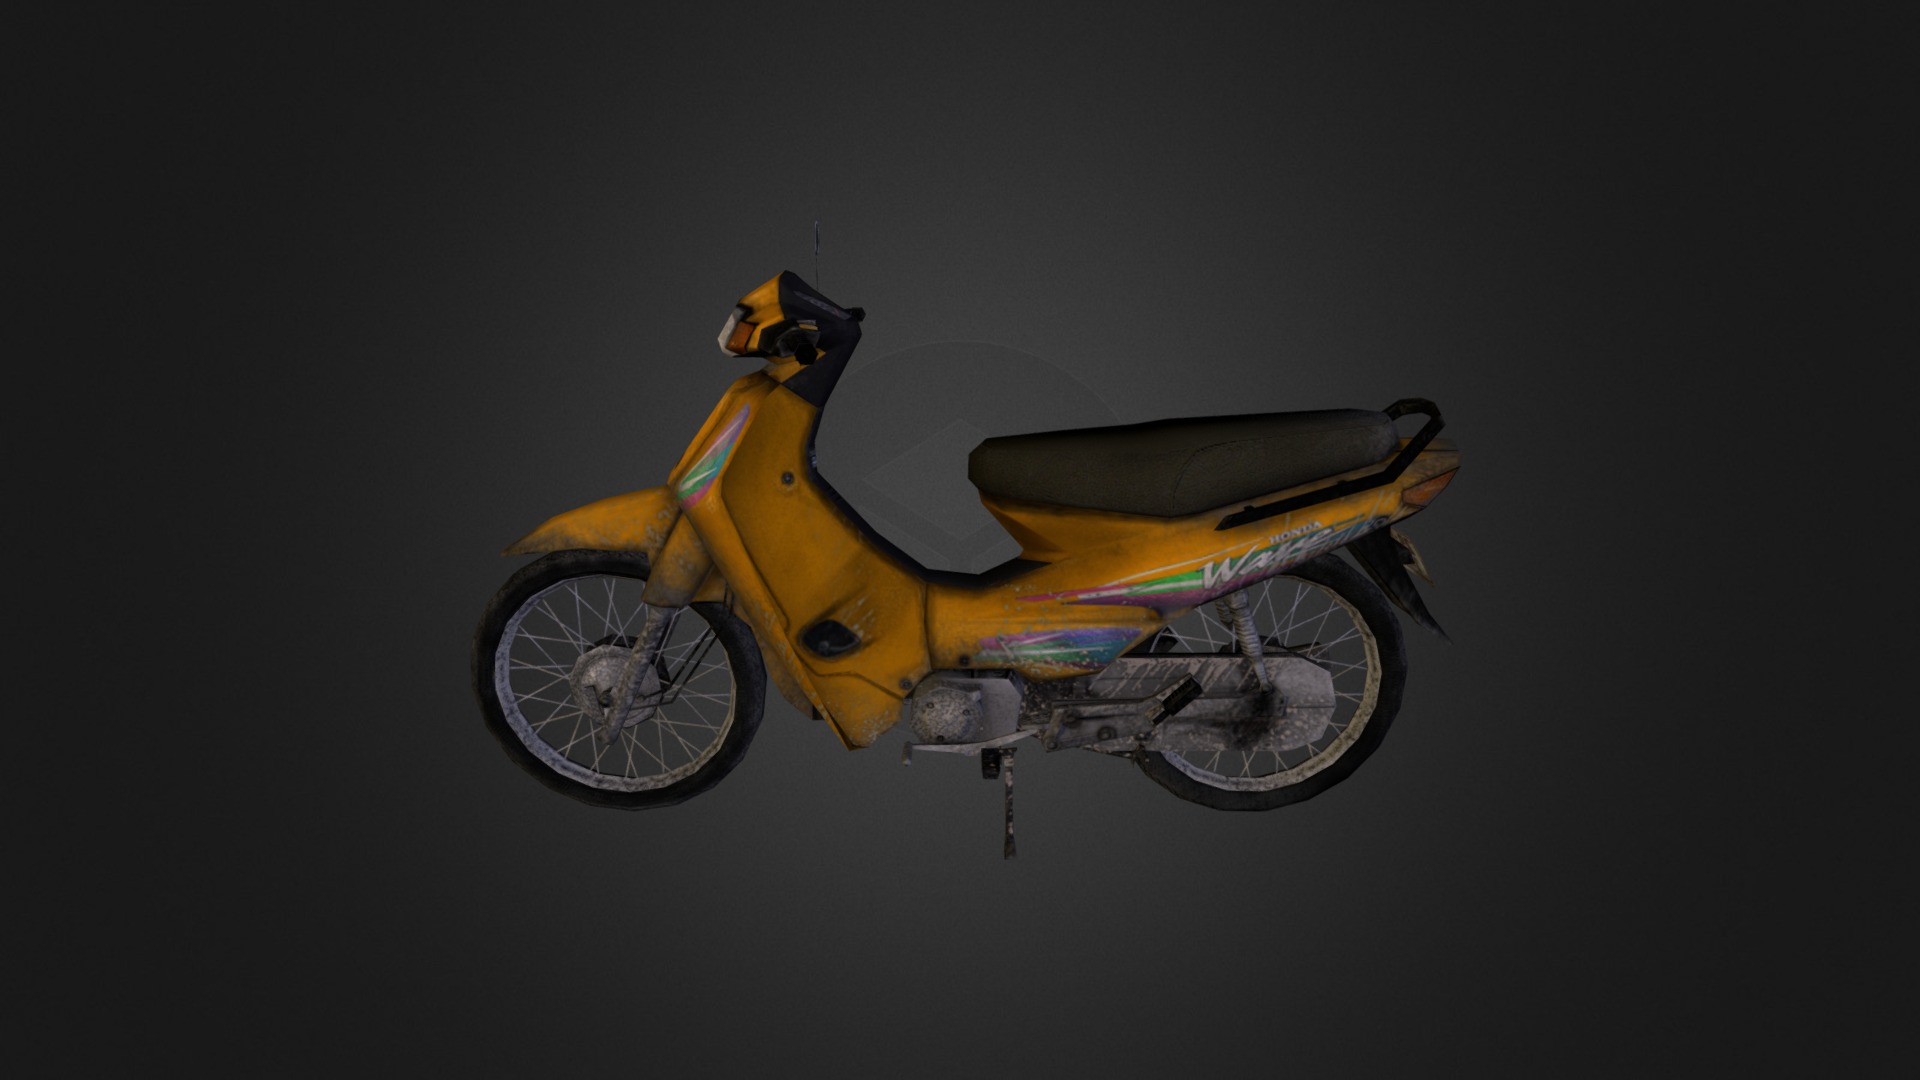 3D model Scooter Ware 110 - This is a 3D model of the Scooter Ware 110. The 3D model is about a yellow and black motorcycle.